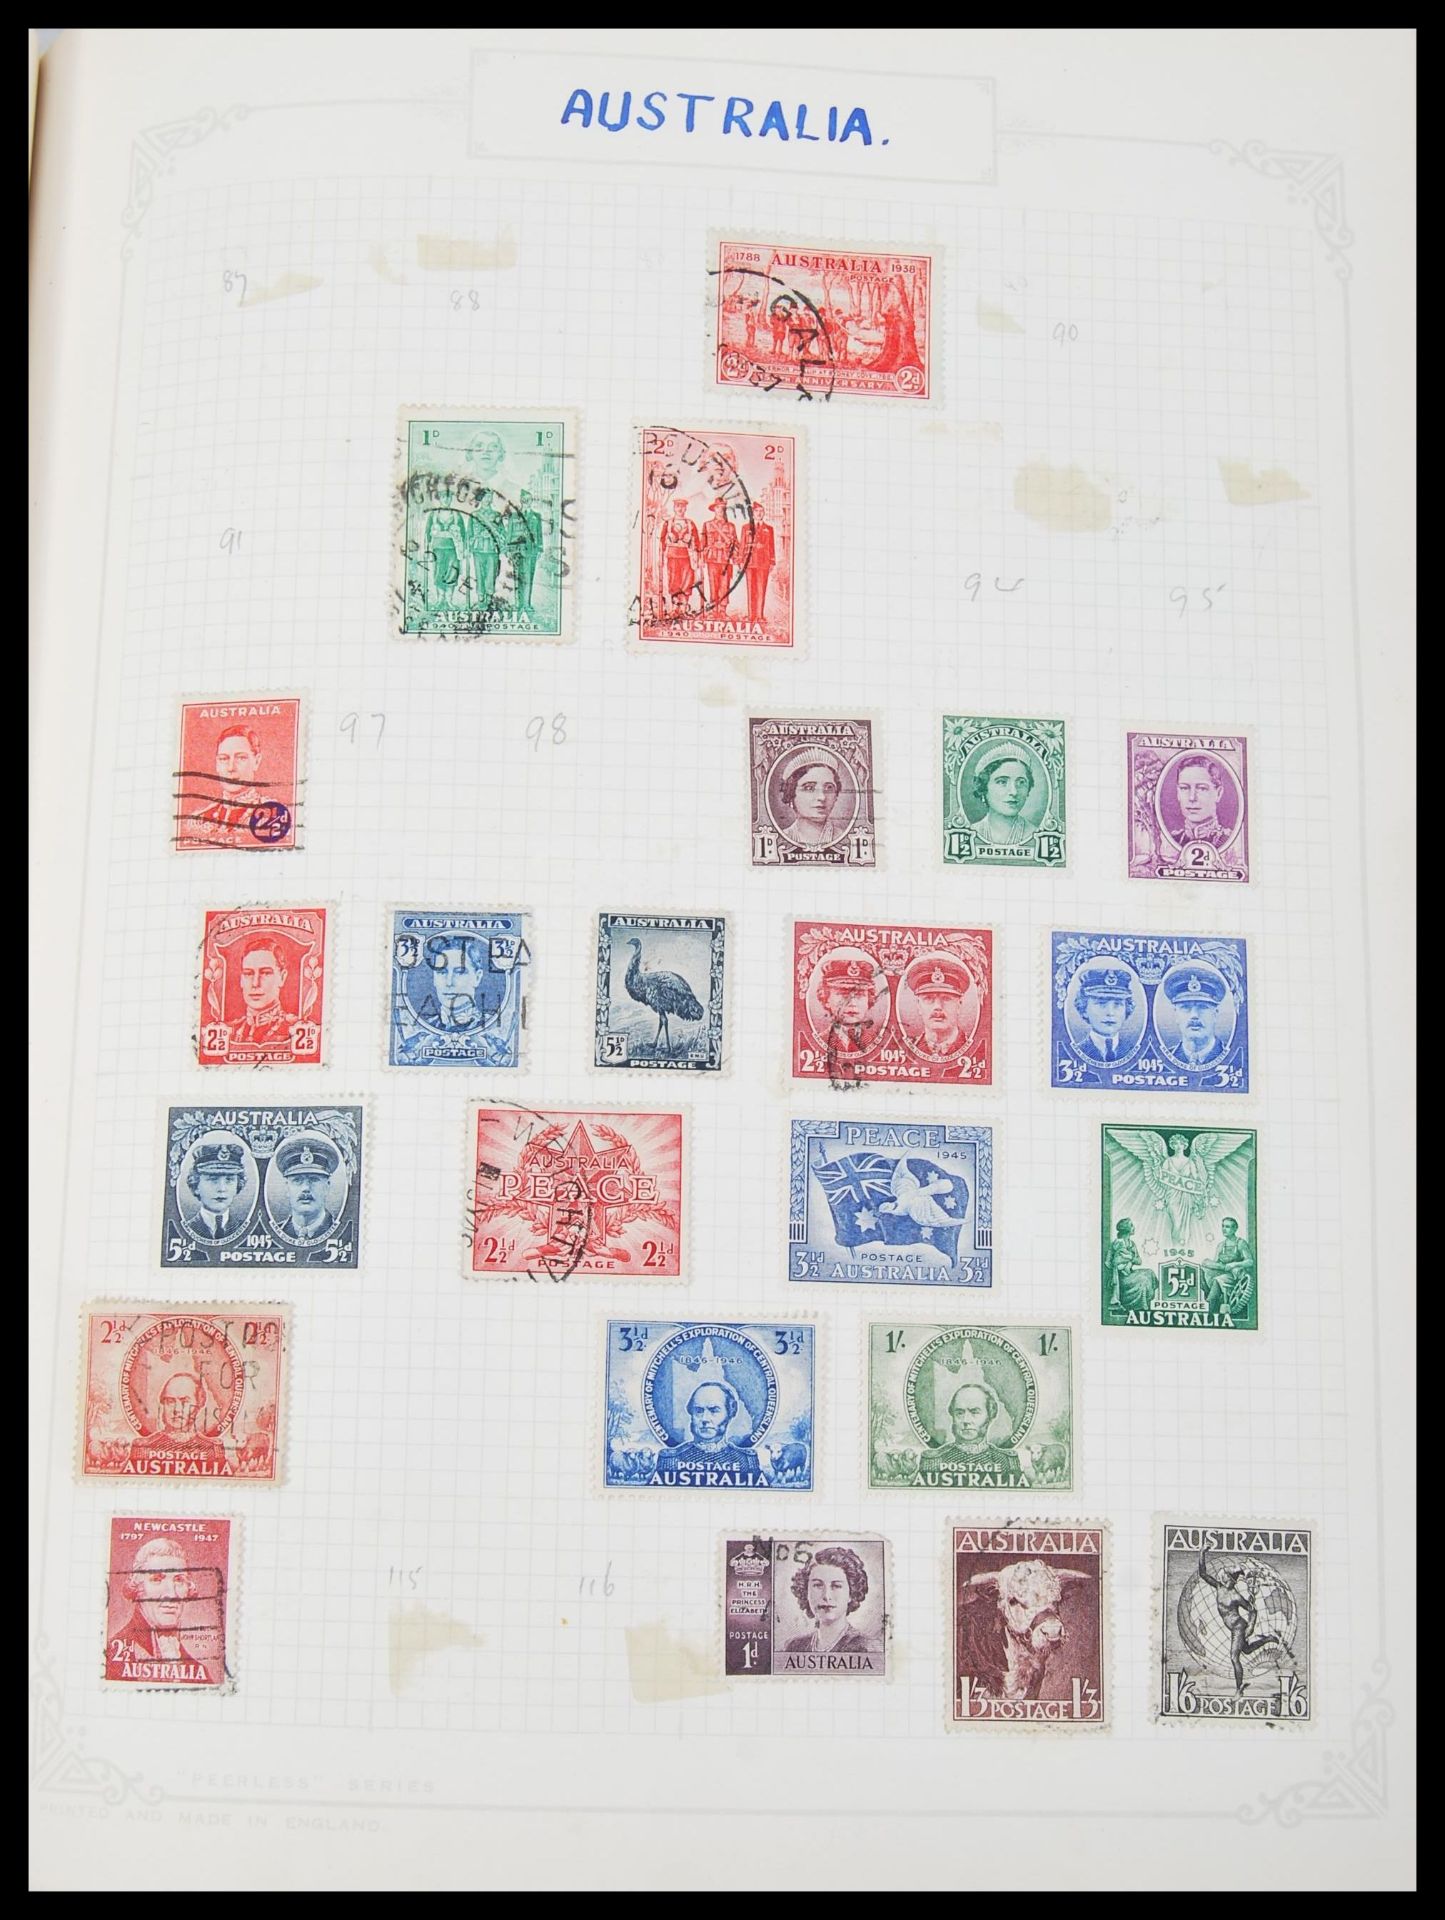 A collection of mostly early 20th Century world stamps including Northern and Southern Rhodesian